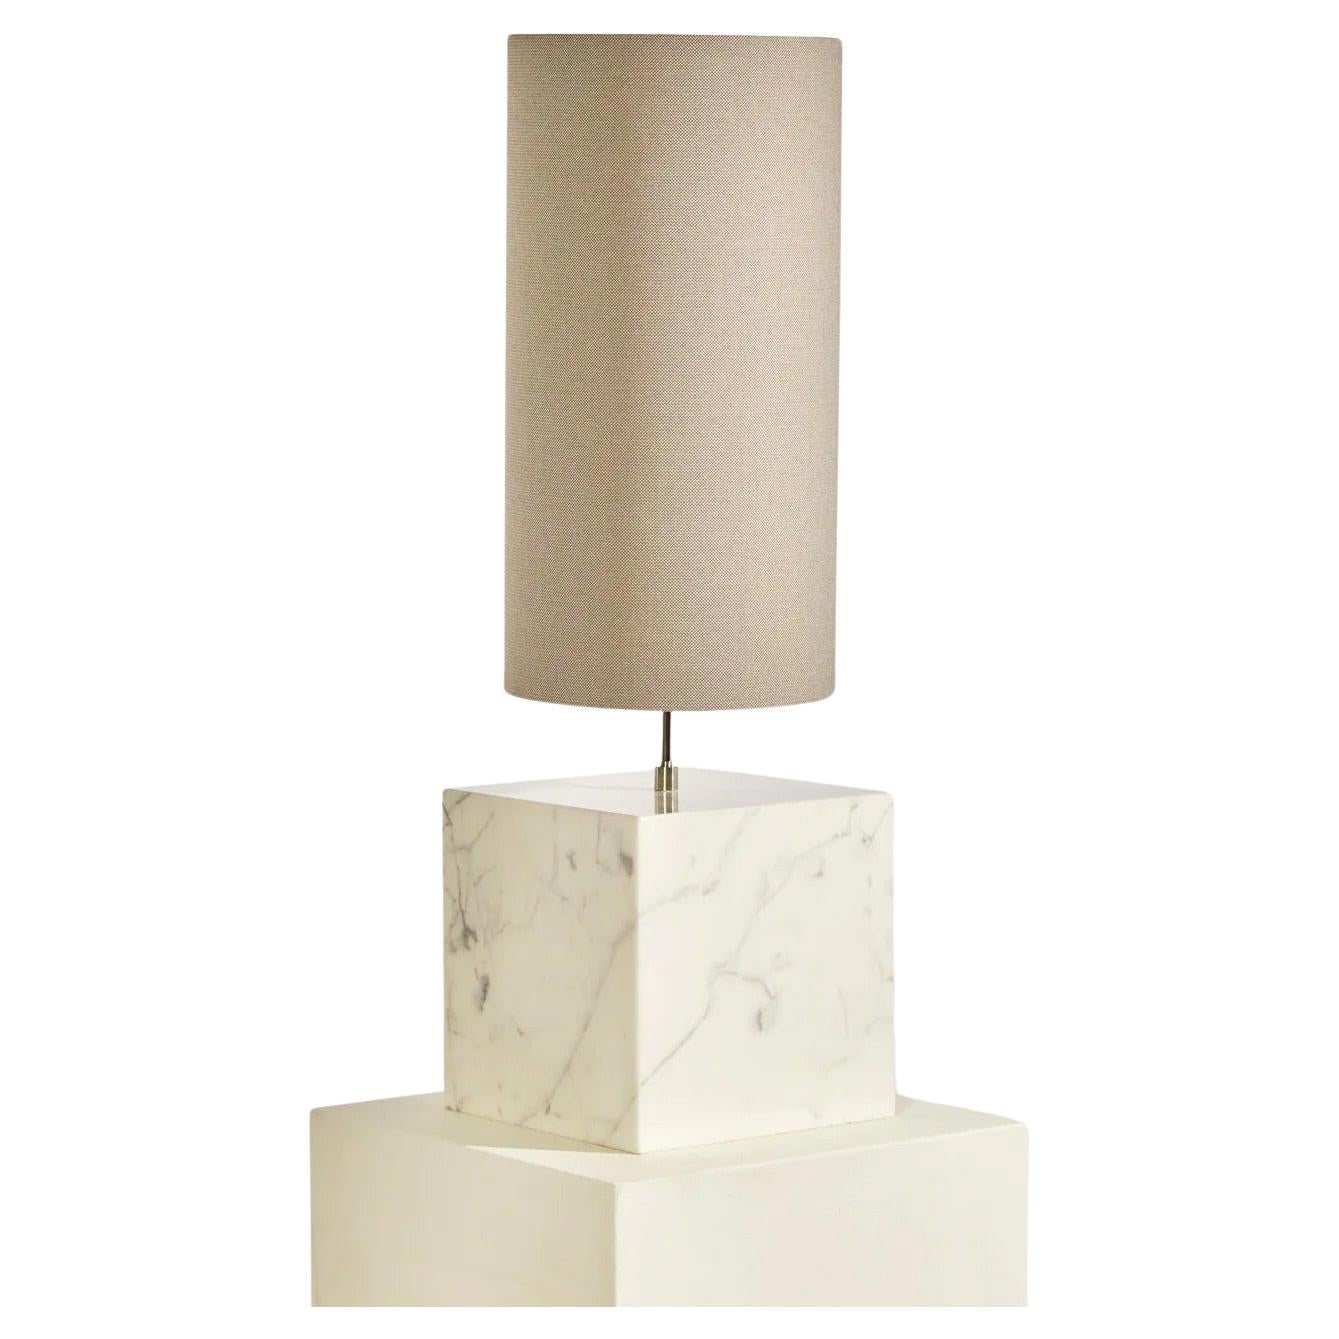 The Coexist Table Lamp is the outcome of a thoughtful design procedure that gives a new lifecycle to exquisite materials in a bold and unique way. The lamp is made entirely of recycled and long-lasting materials - the handcrafted marble base is